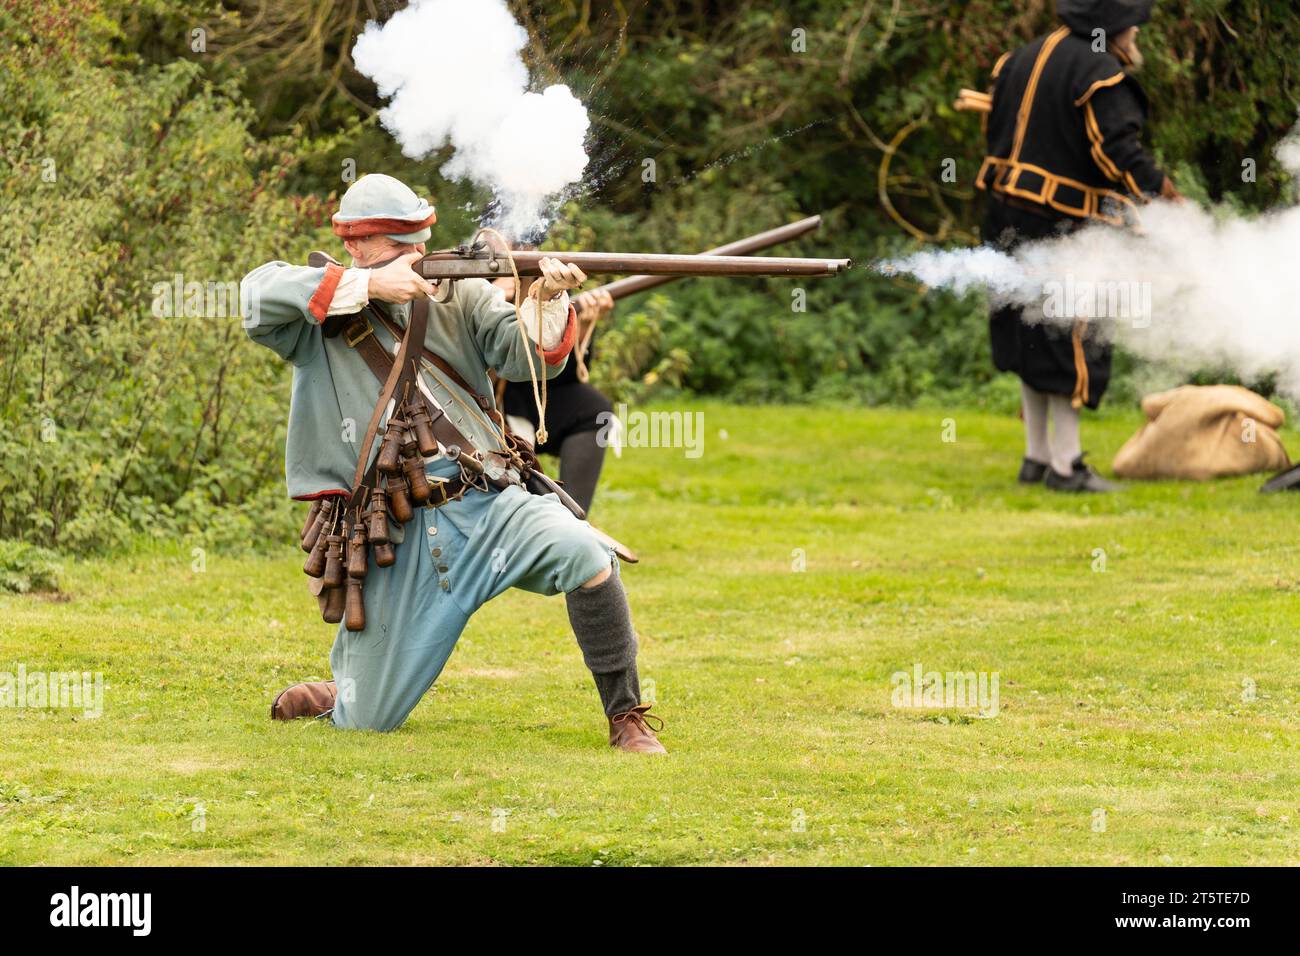 A musketeer firing a flintlock musket - the Siege of Basing House, from the English civil war, English Civil War Society 16.09.23, Basingstoke Stock Photo